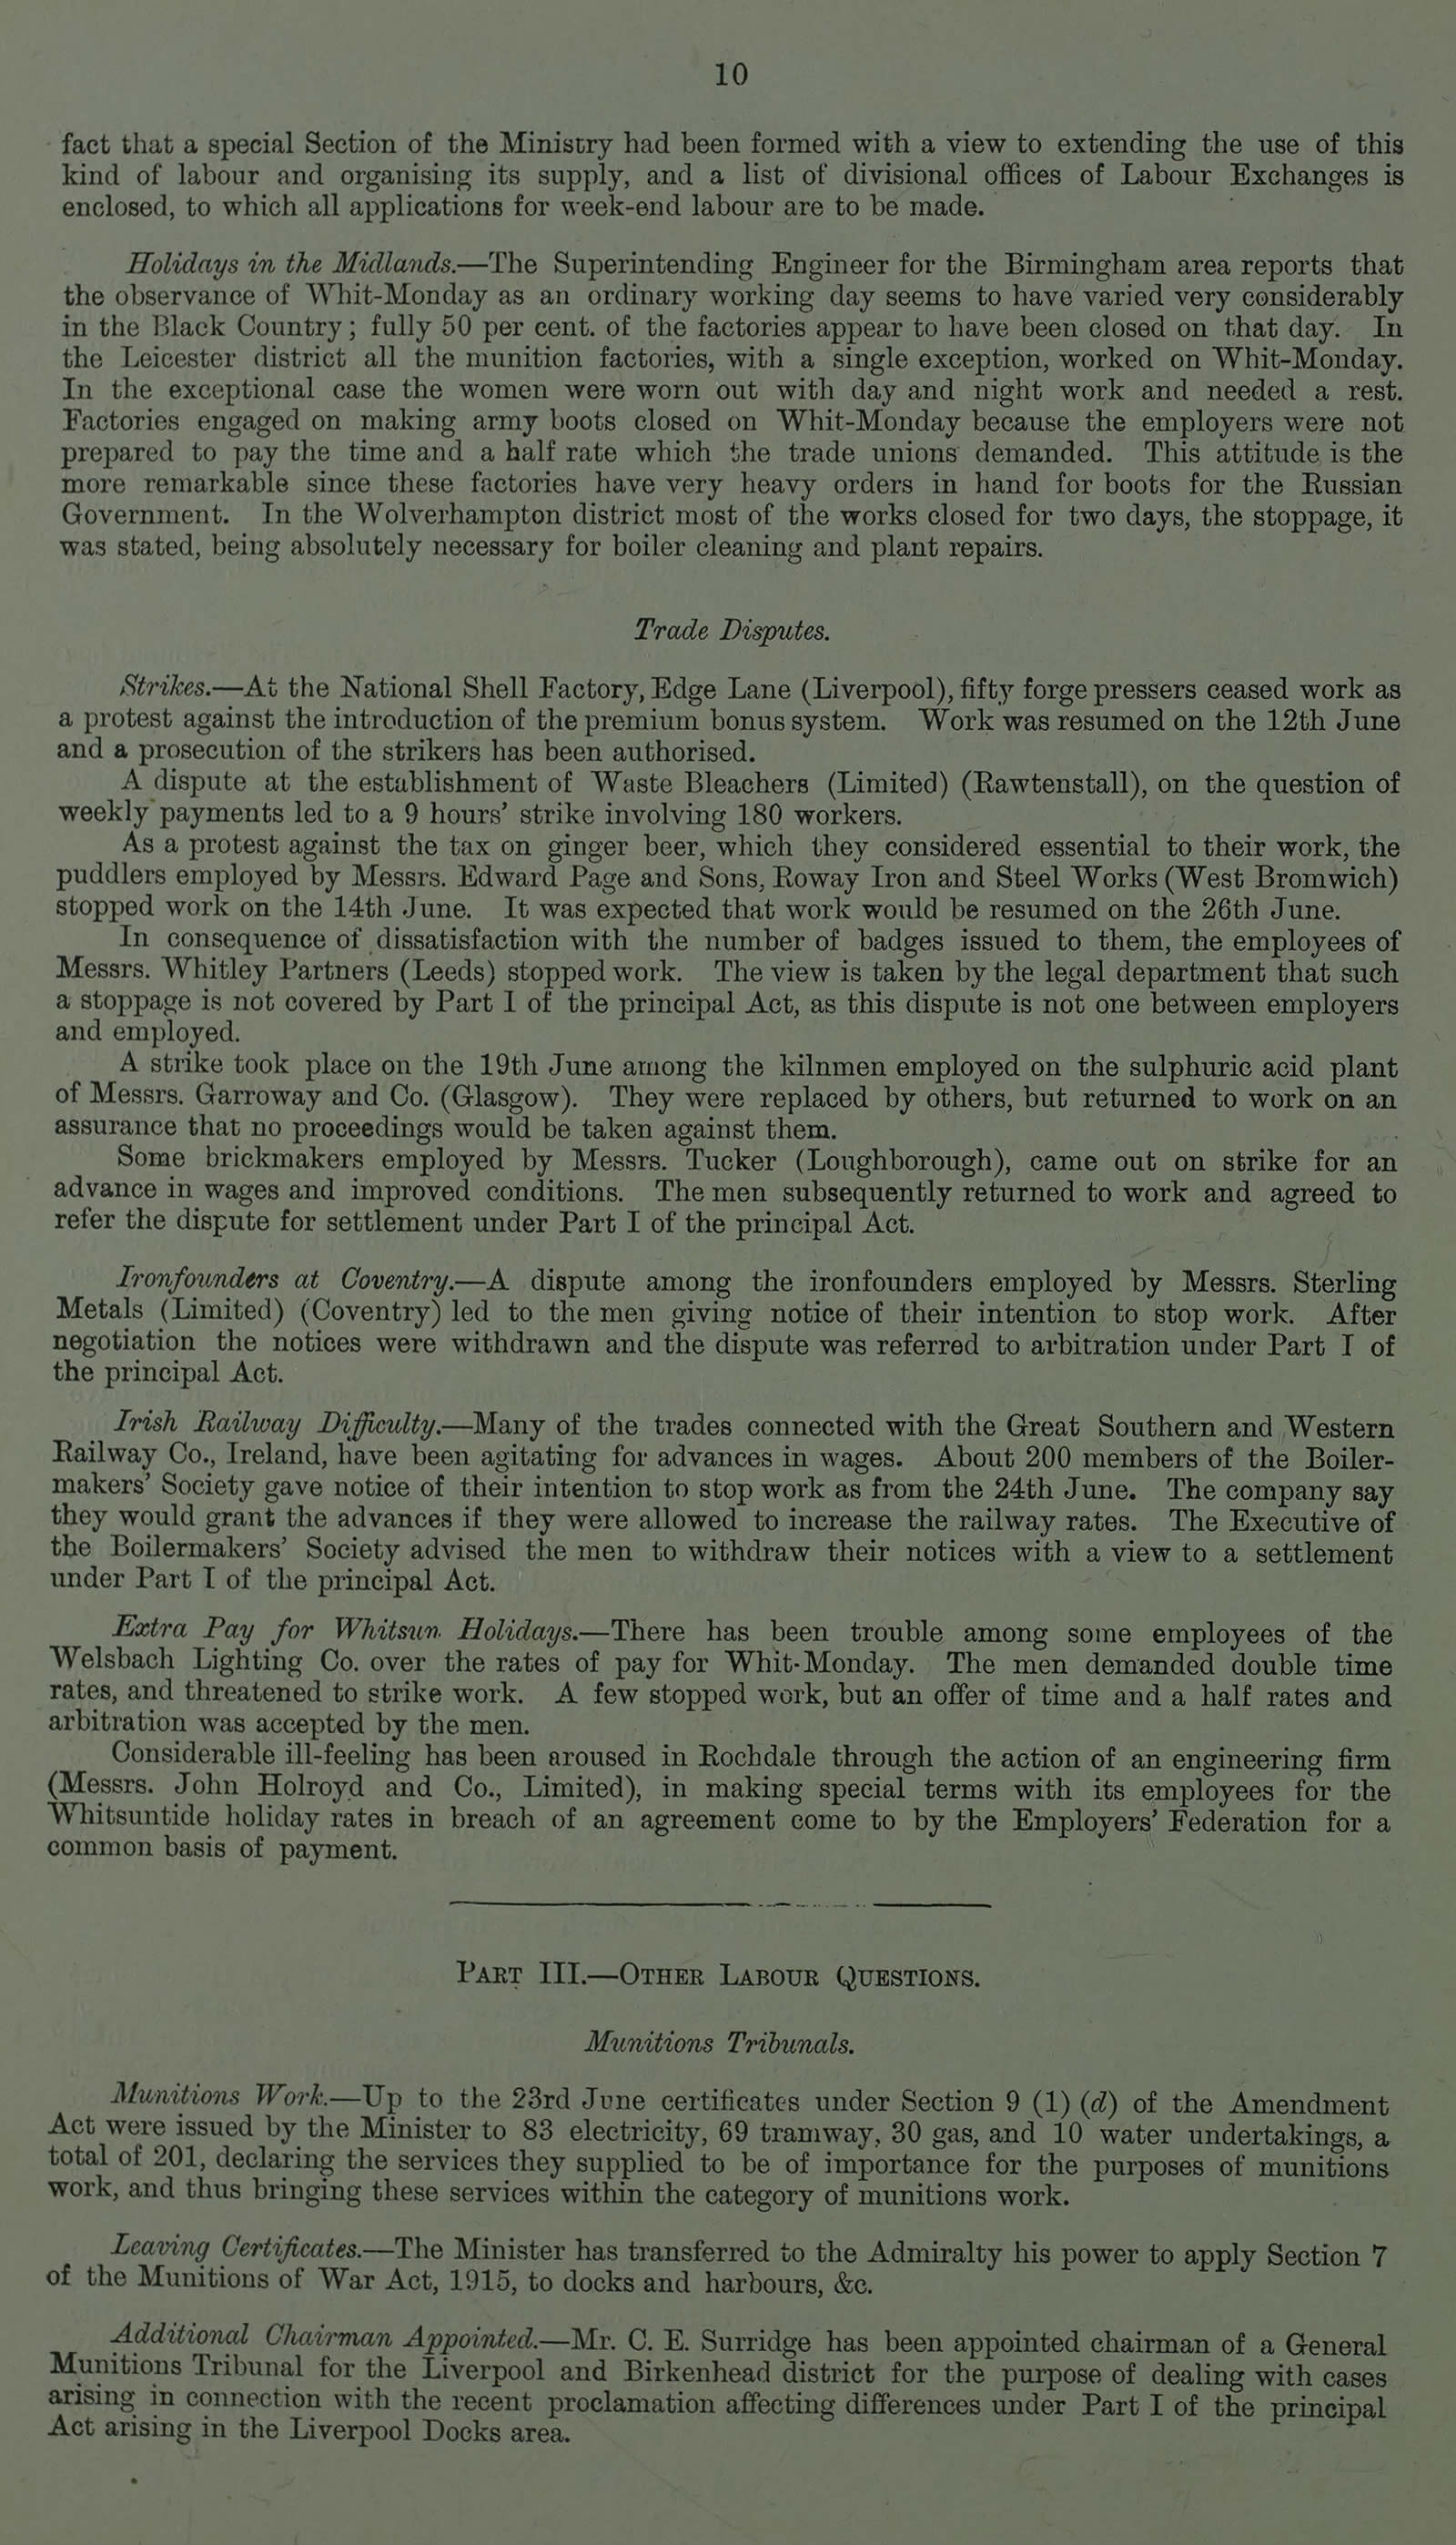 Image of one page of a typed report on trade disputes 